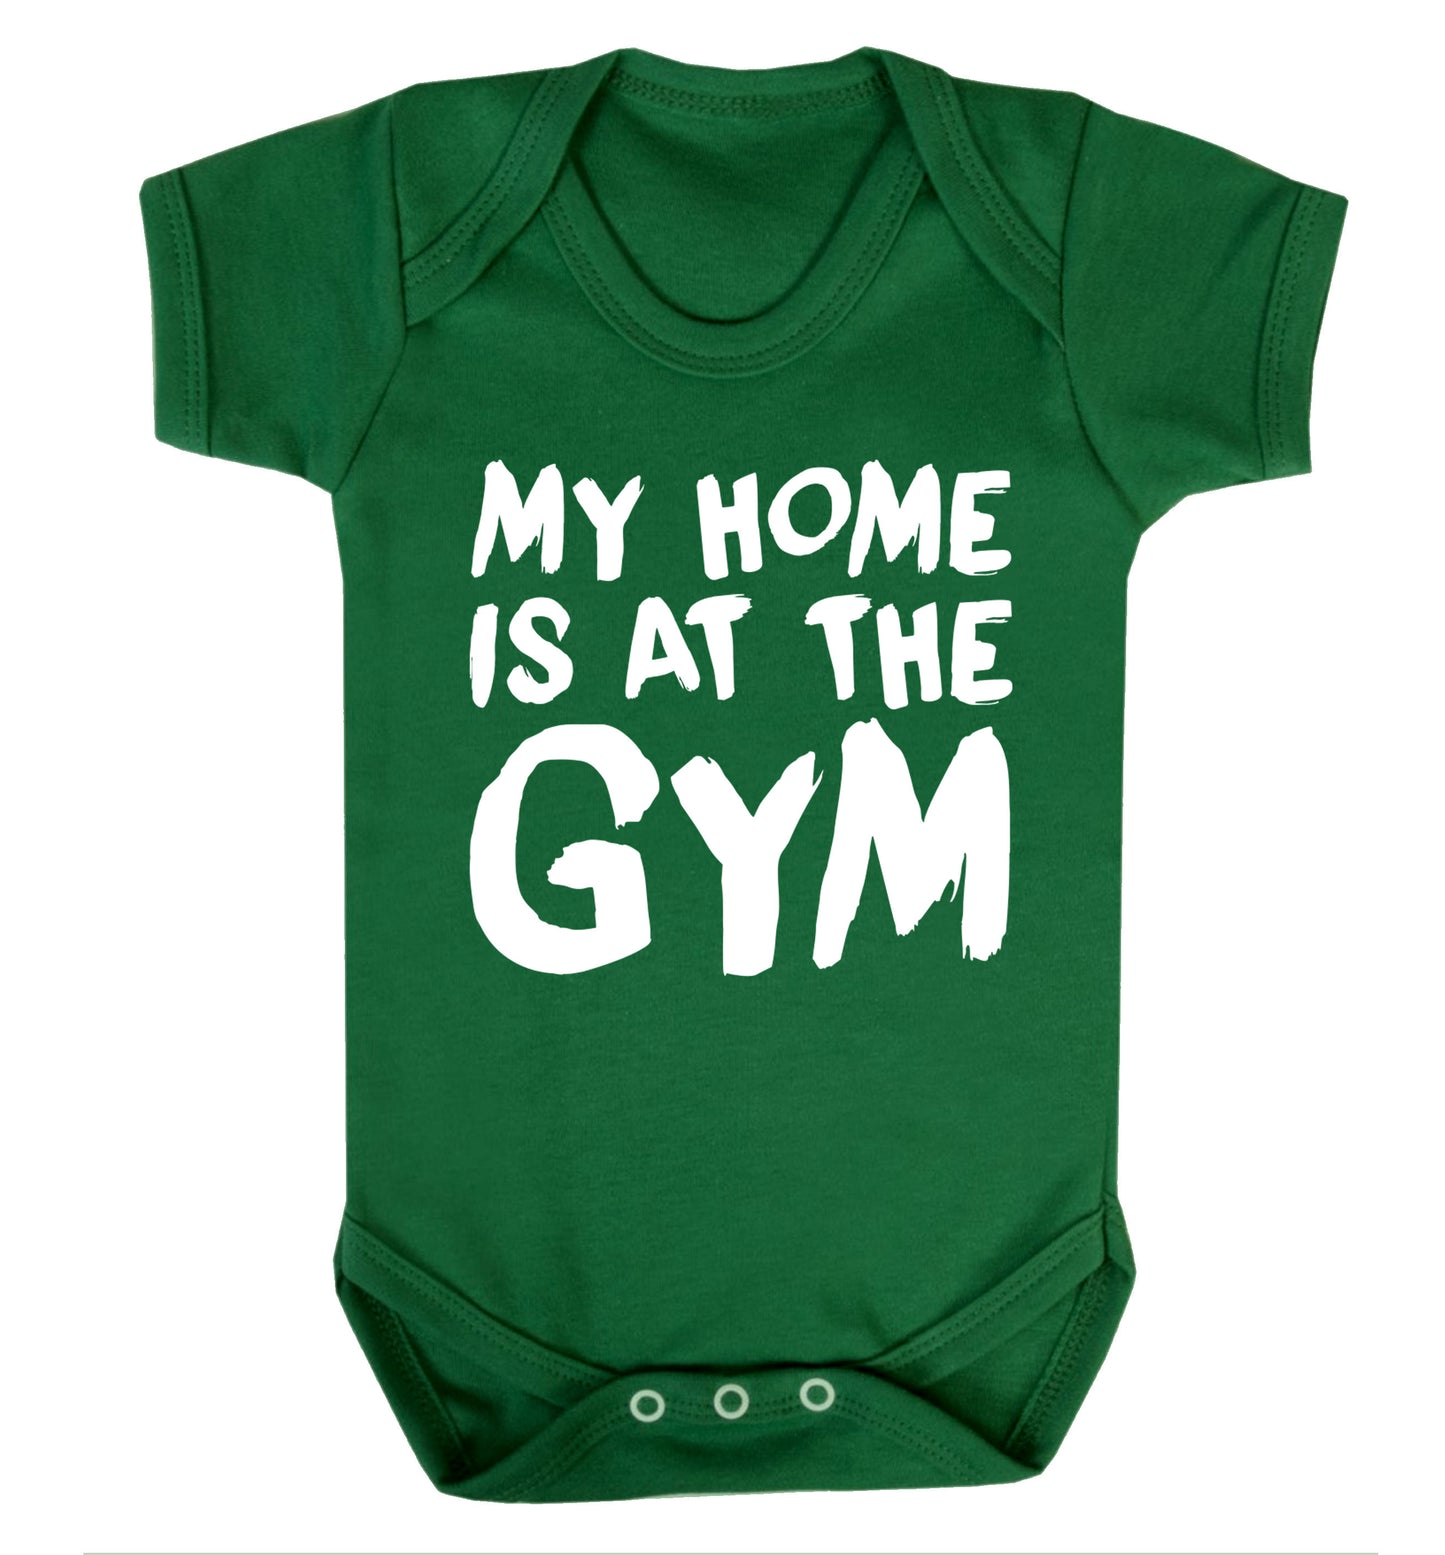 My home is at the gym Baby Vest green 18-24 months